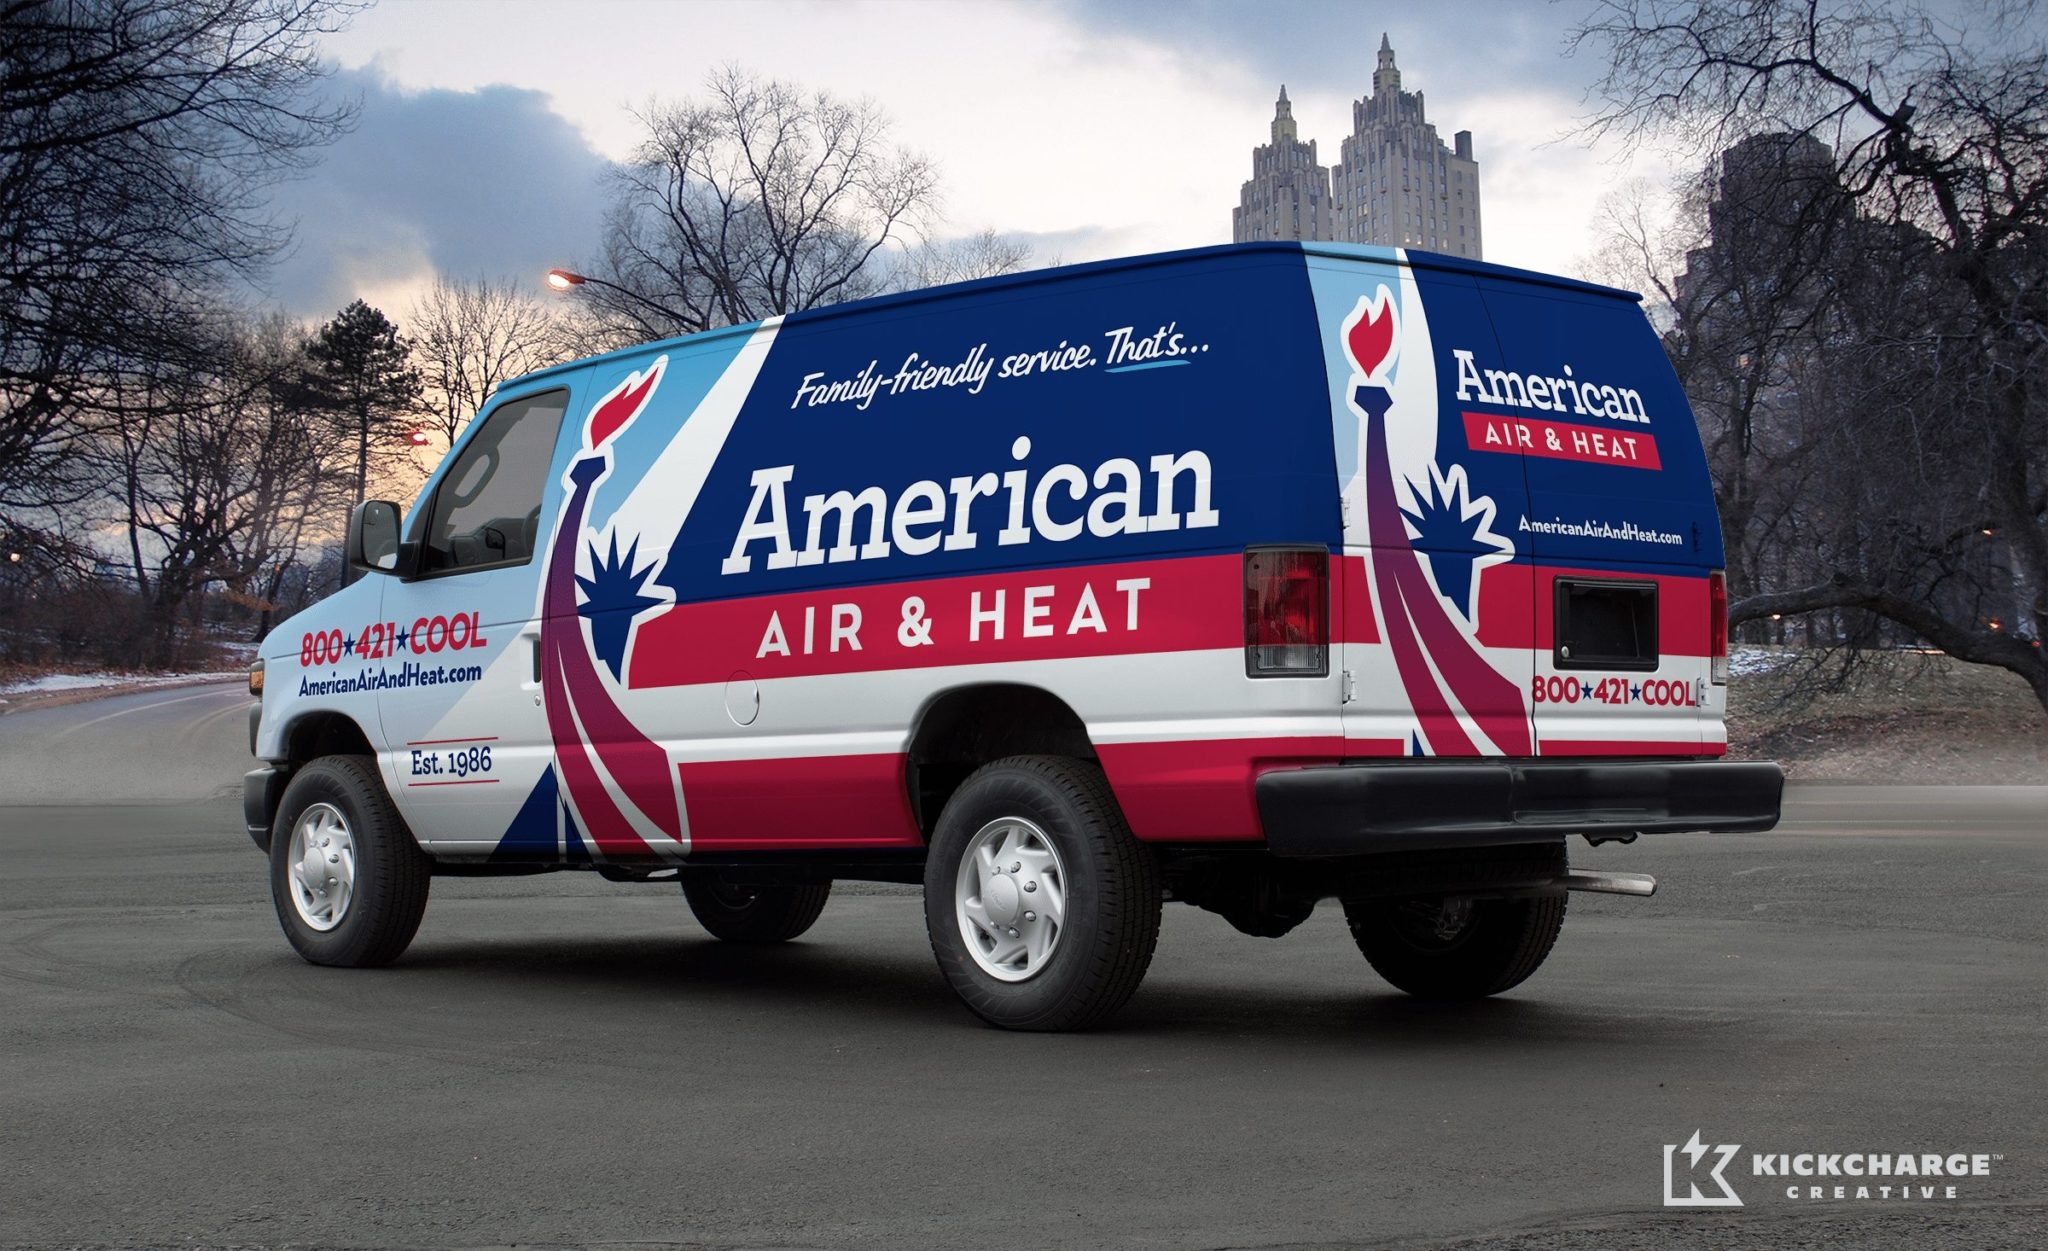 This truck wrap design conveys the brand's core values—trust, reliability and professionalism—as it rolls through neighborhoods in Central Florida.